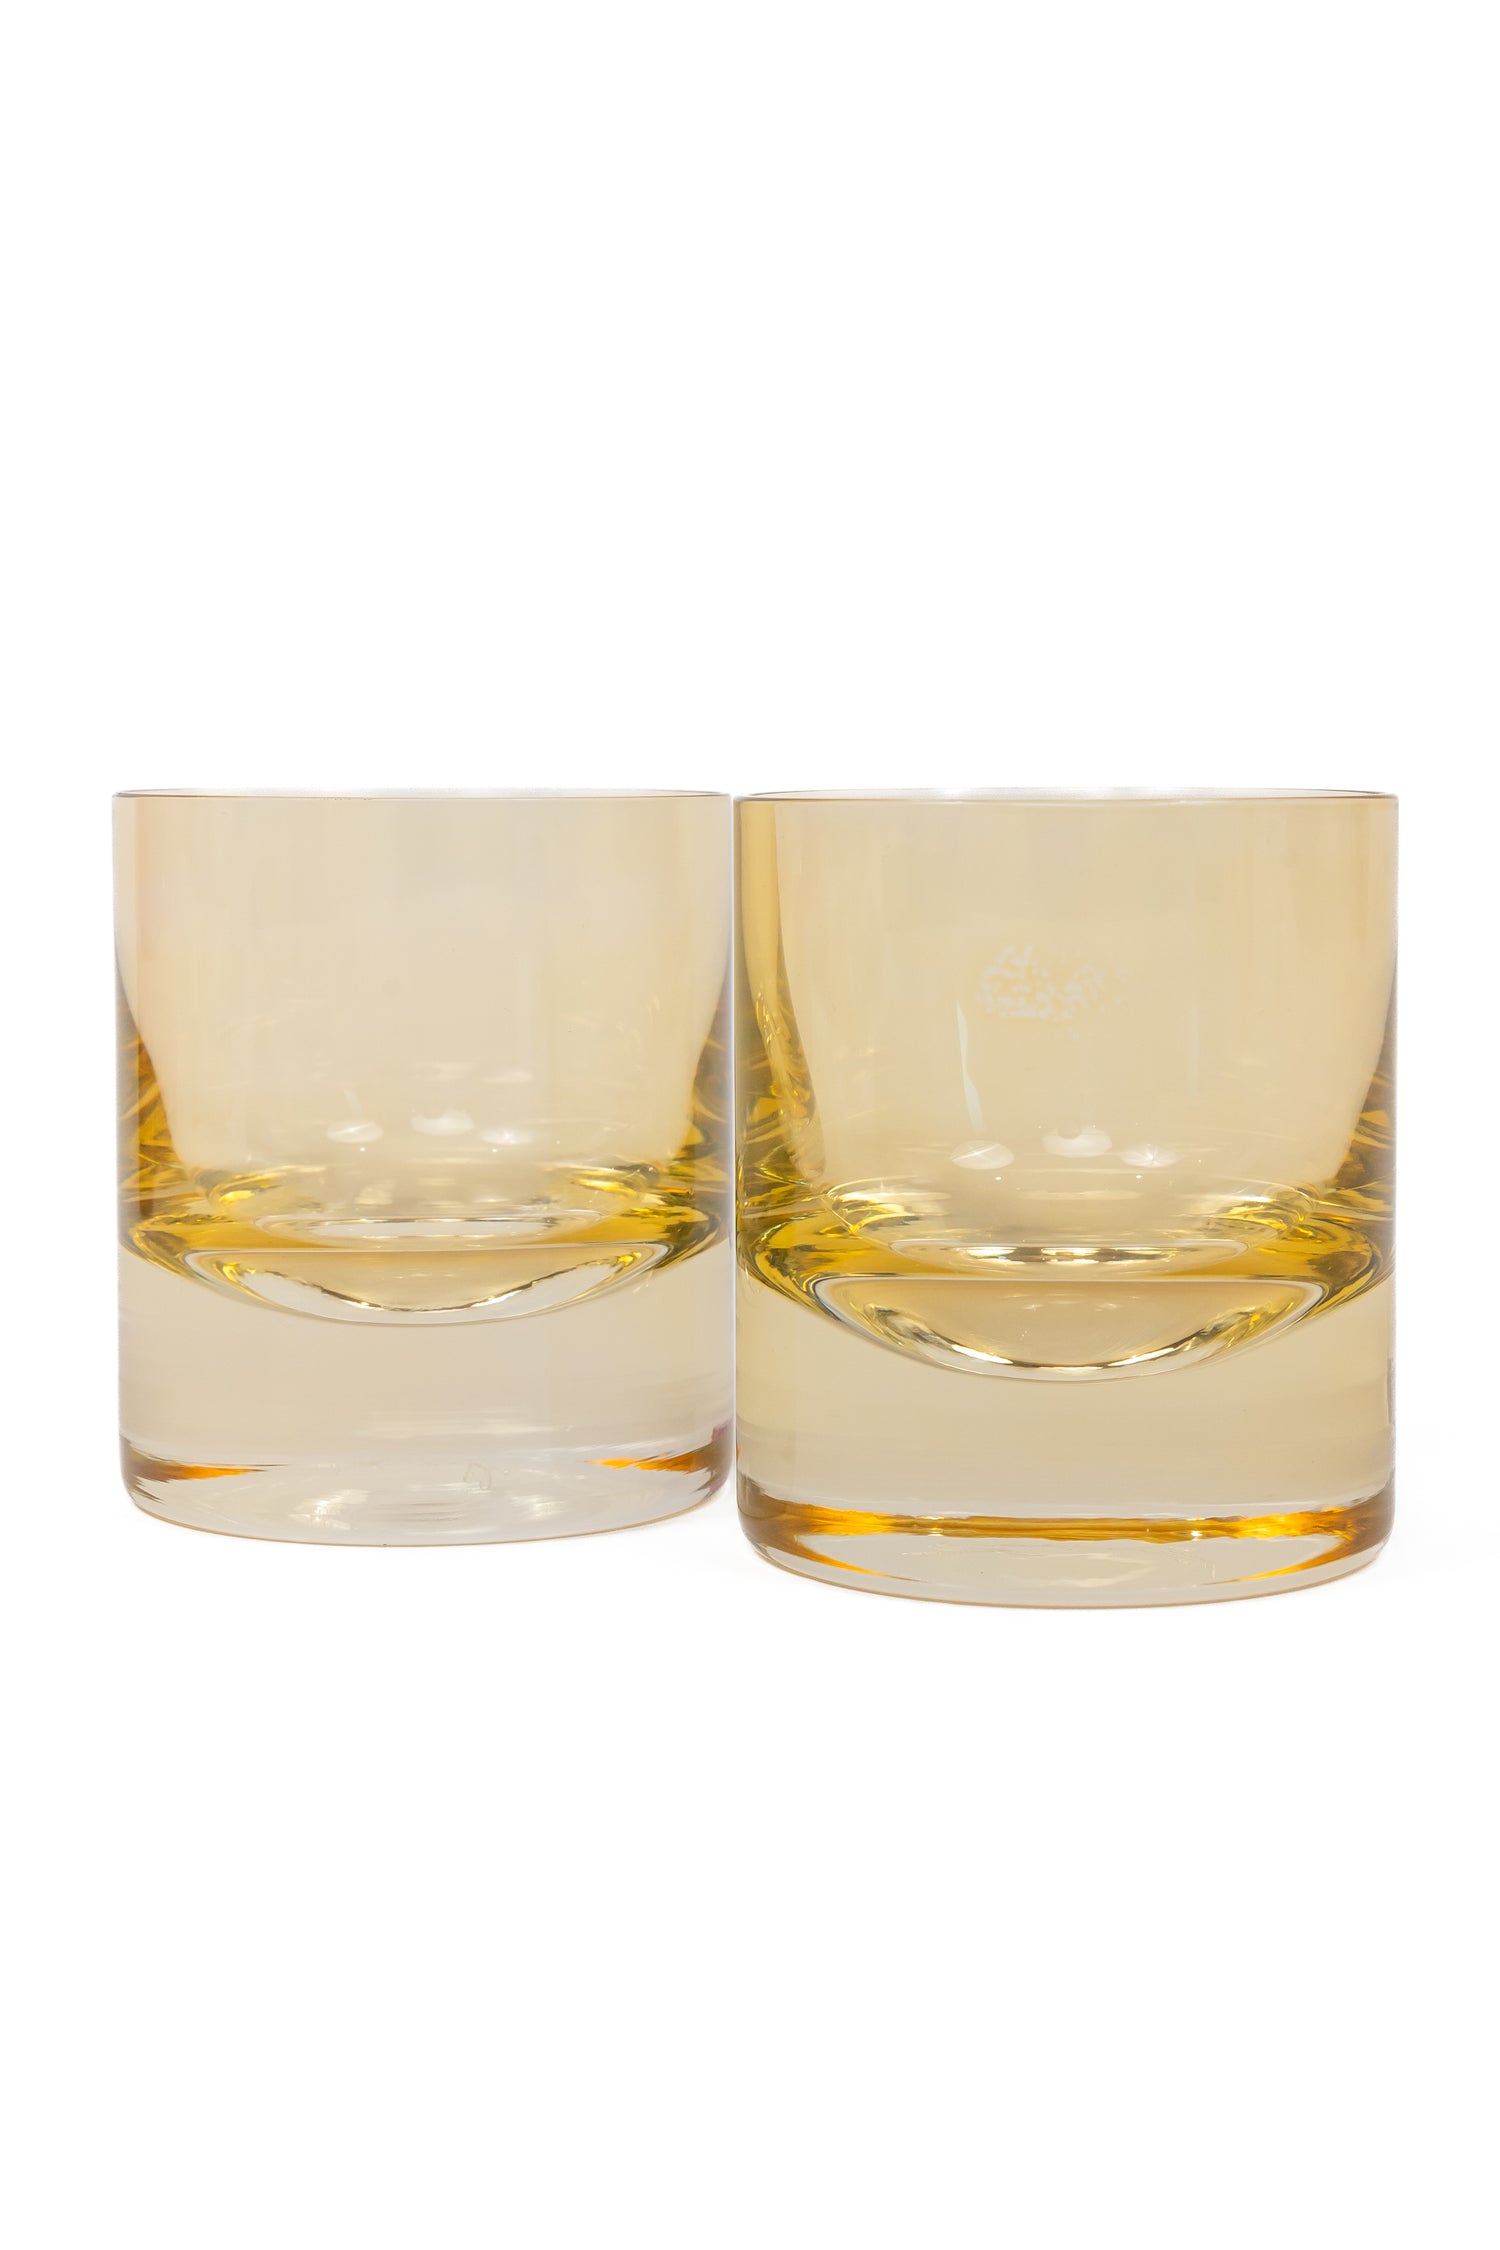 Estelle Colored Rock Glass - Set of 2 {Yellow}